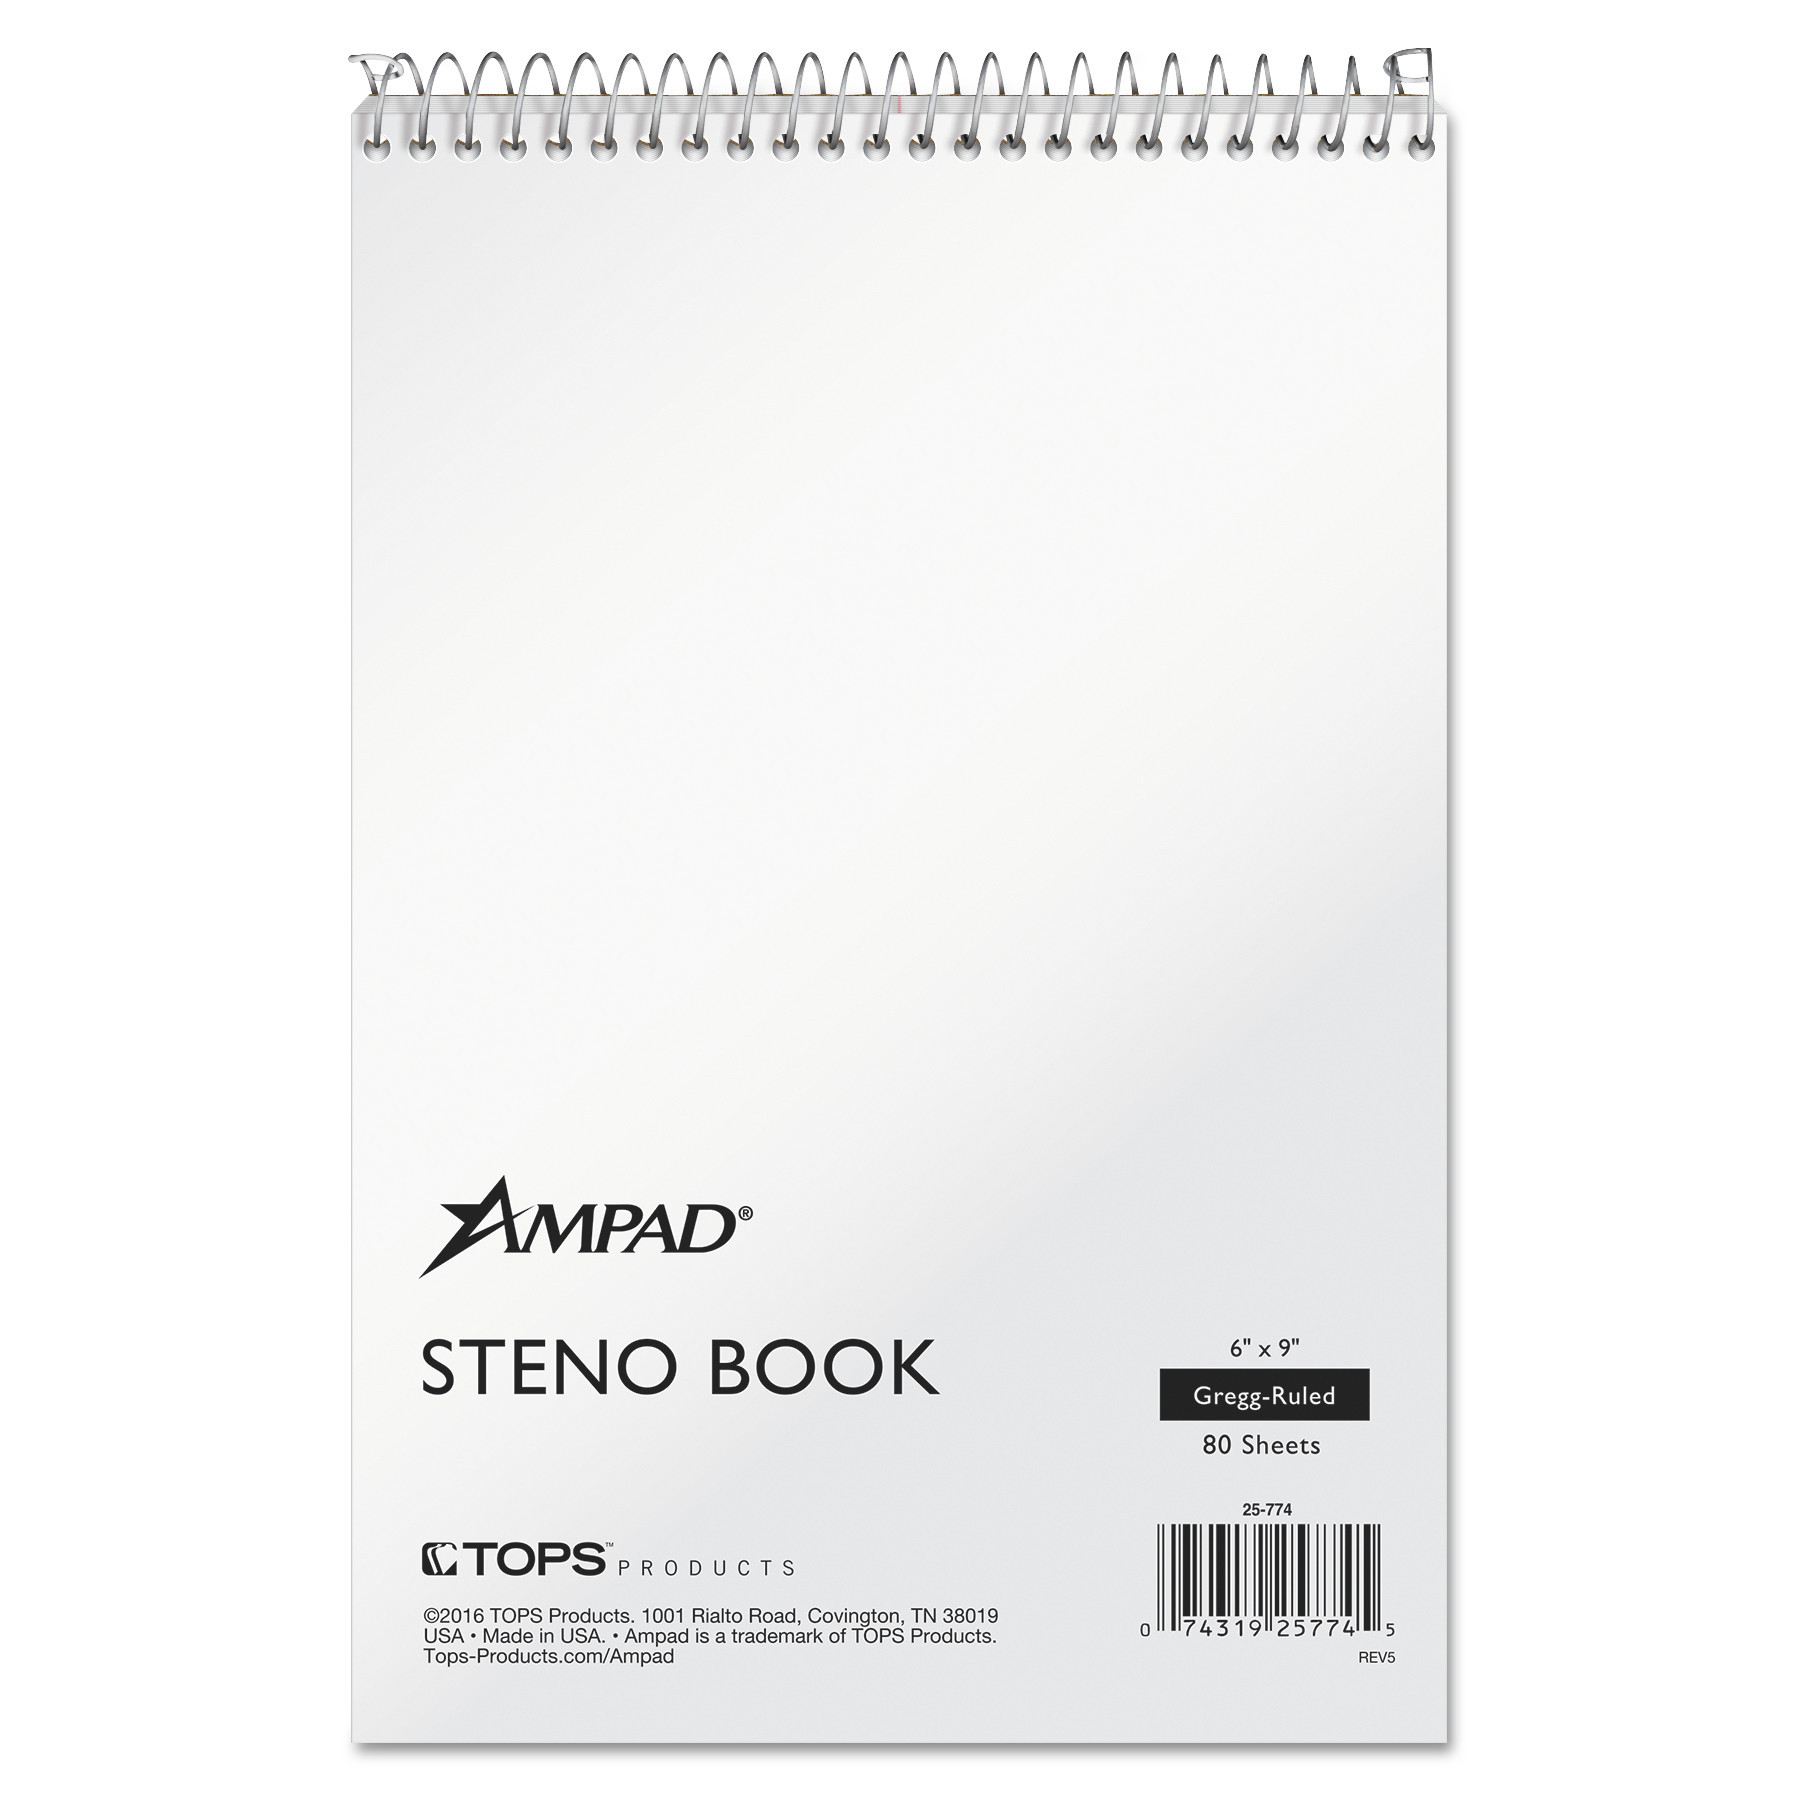 939888-1 Steno Note Pad: 6 in x 9 in Sheet Size, Gregg, White, 80 Sheets, Blue,  Card Stock, 12 PK